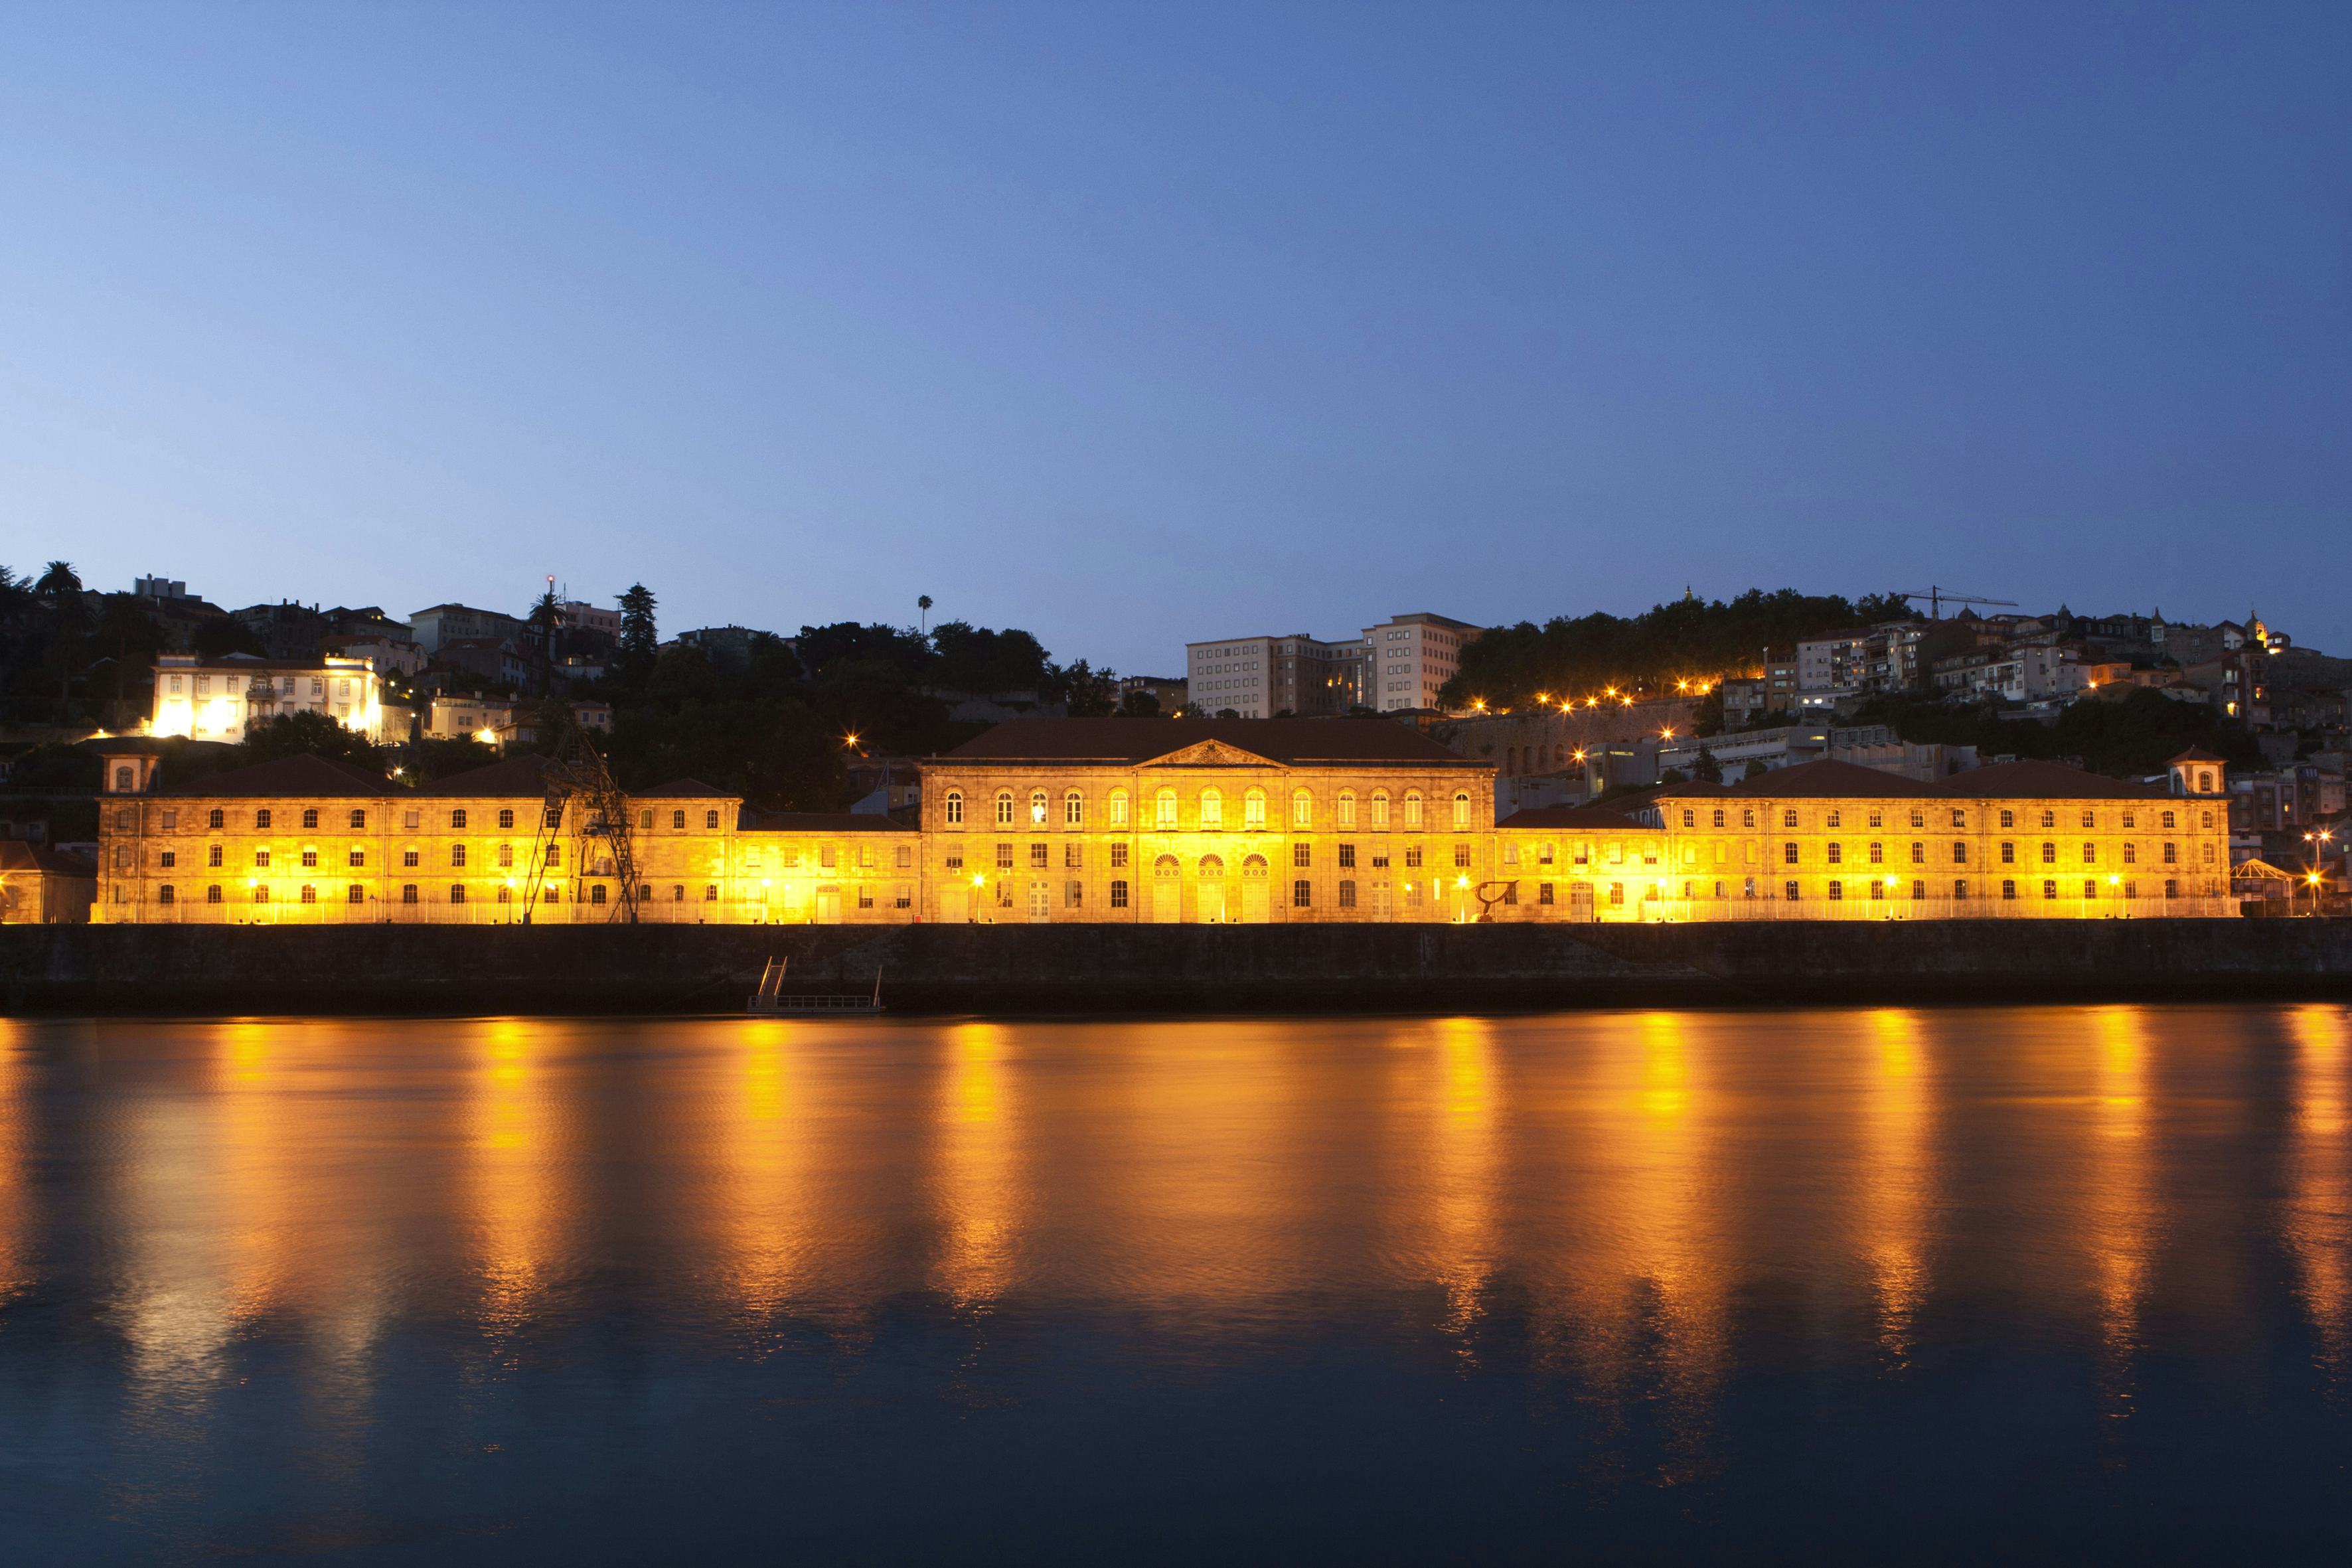 In the evening of the first day the participant of the World Cycling Forum will enjoy a dinner cruise on the Douro river that runs next to the Alfandega Congress Center in Porto where the Forum takes place.